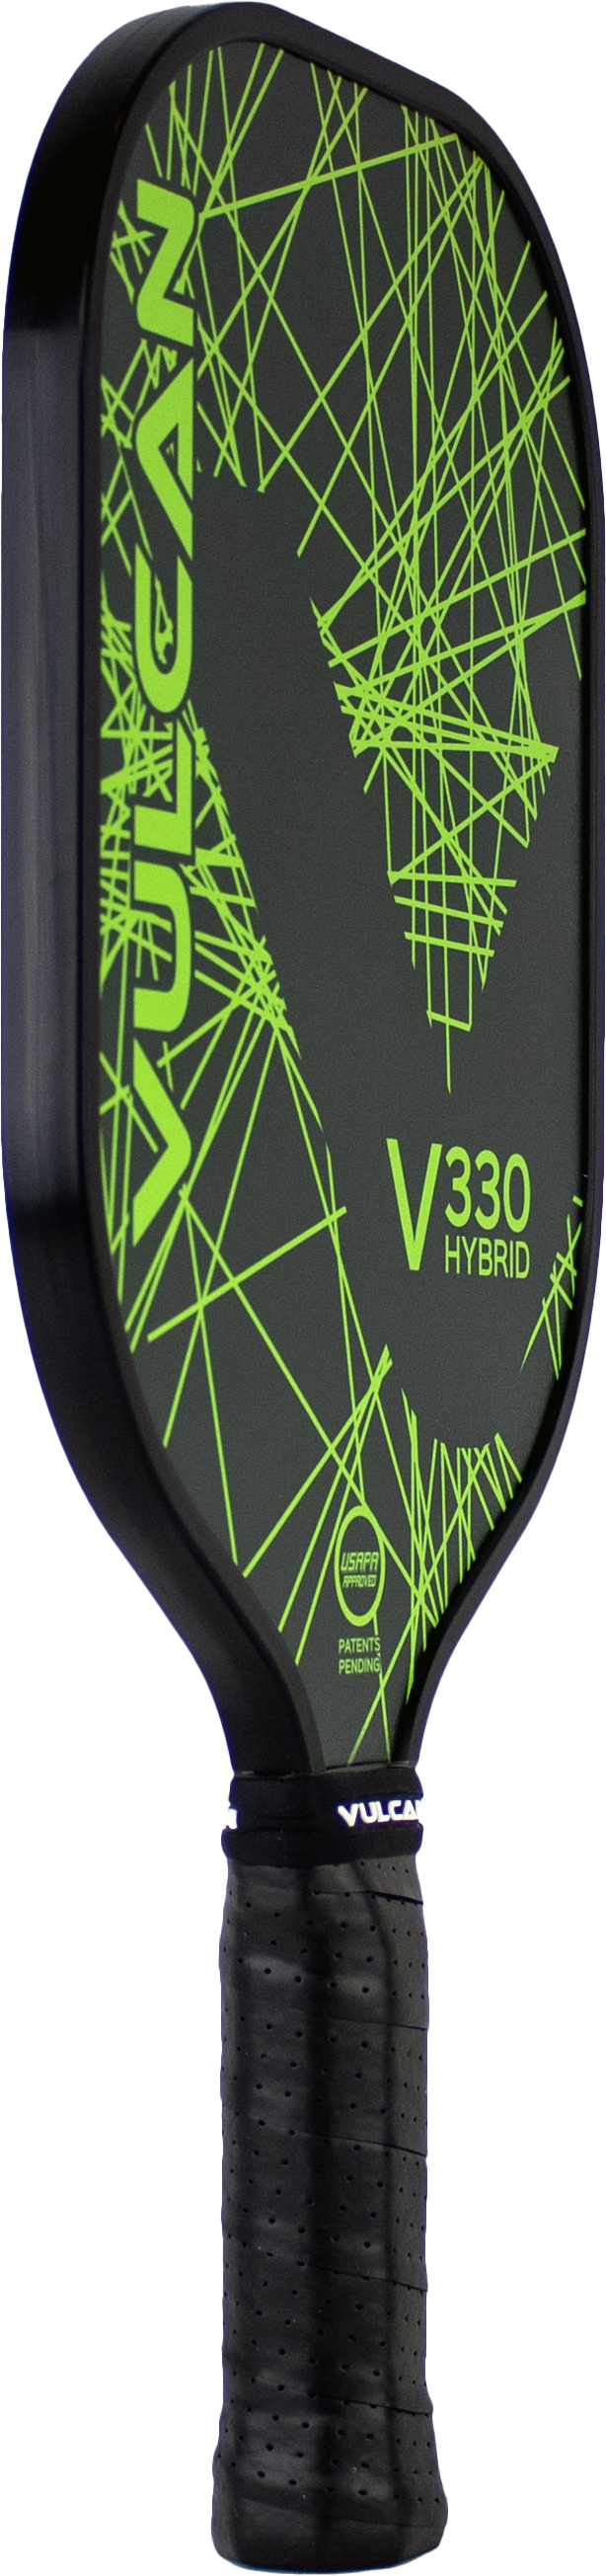 A black and green Vulcan V330 Pickleball Paddle with the word Vulcan on it.